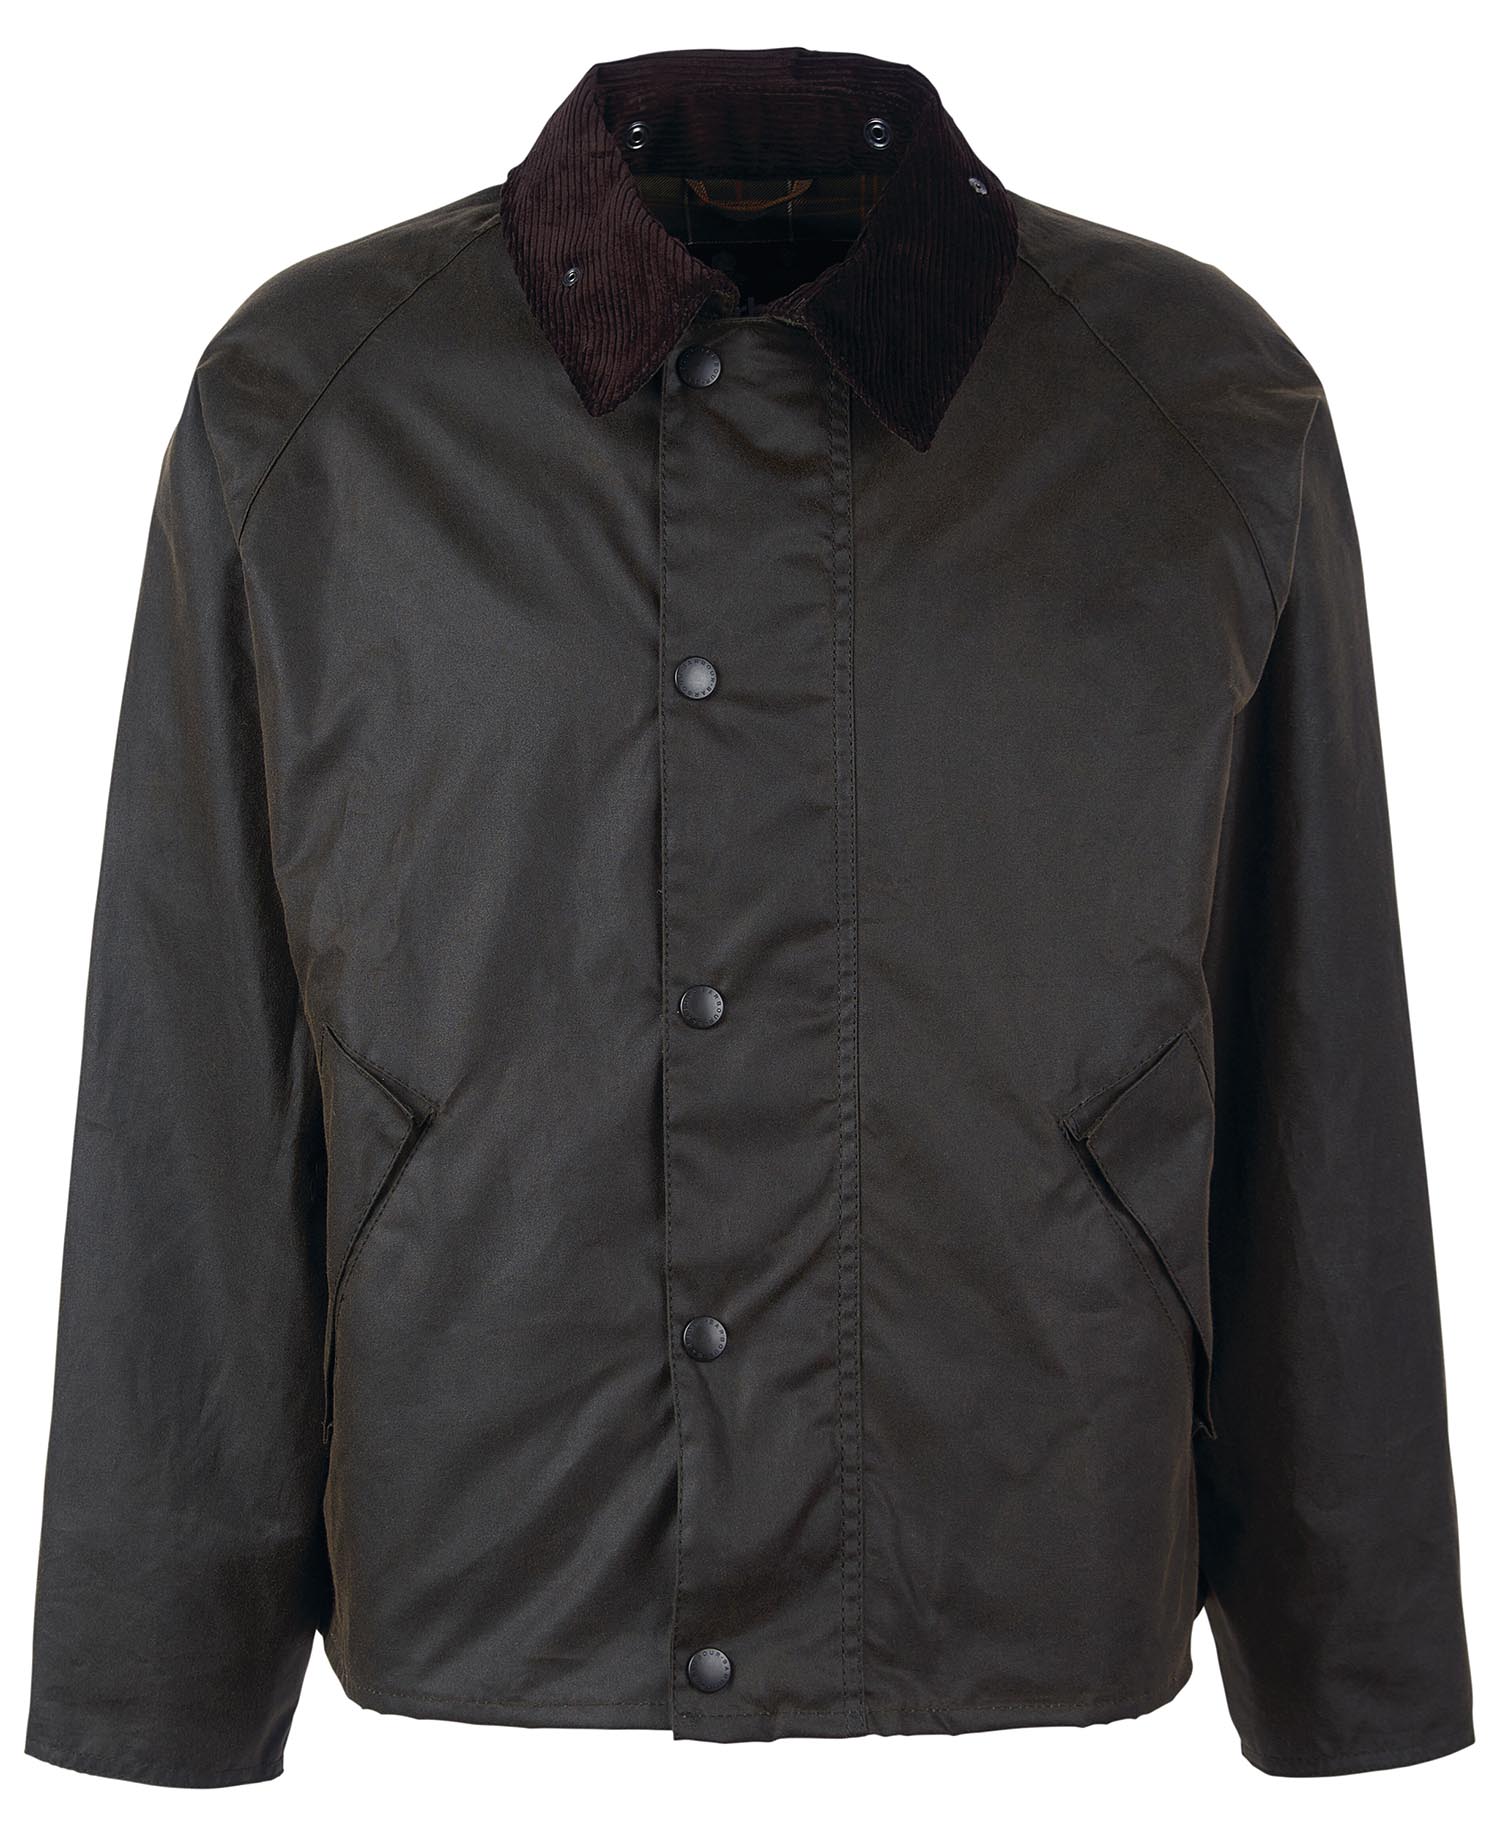 Shop the Barbour Transport Wax Jacket in Green today. | Barbour